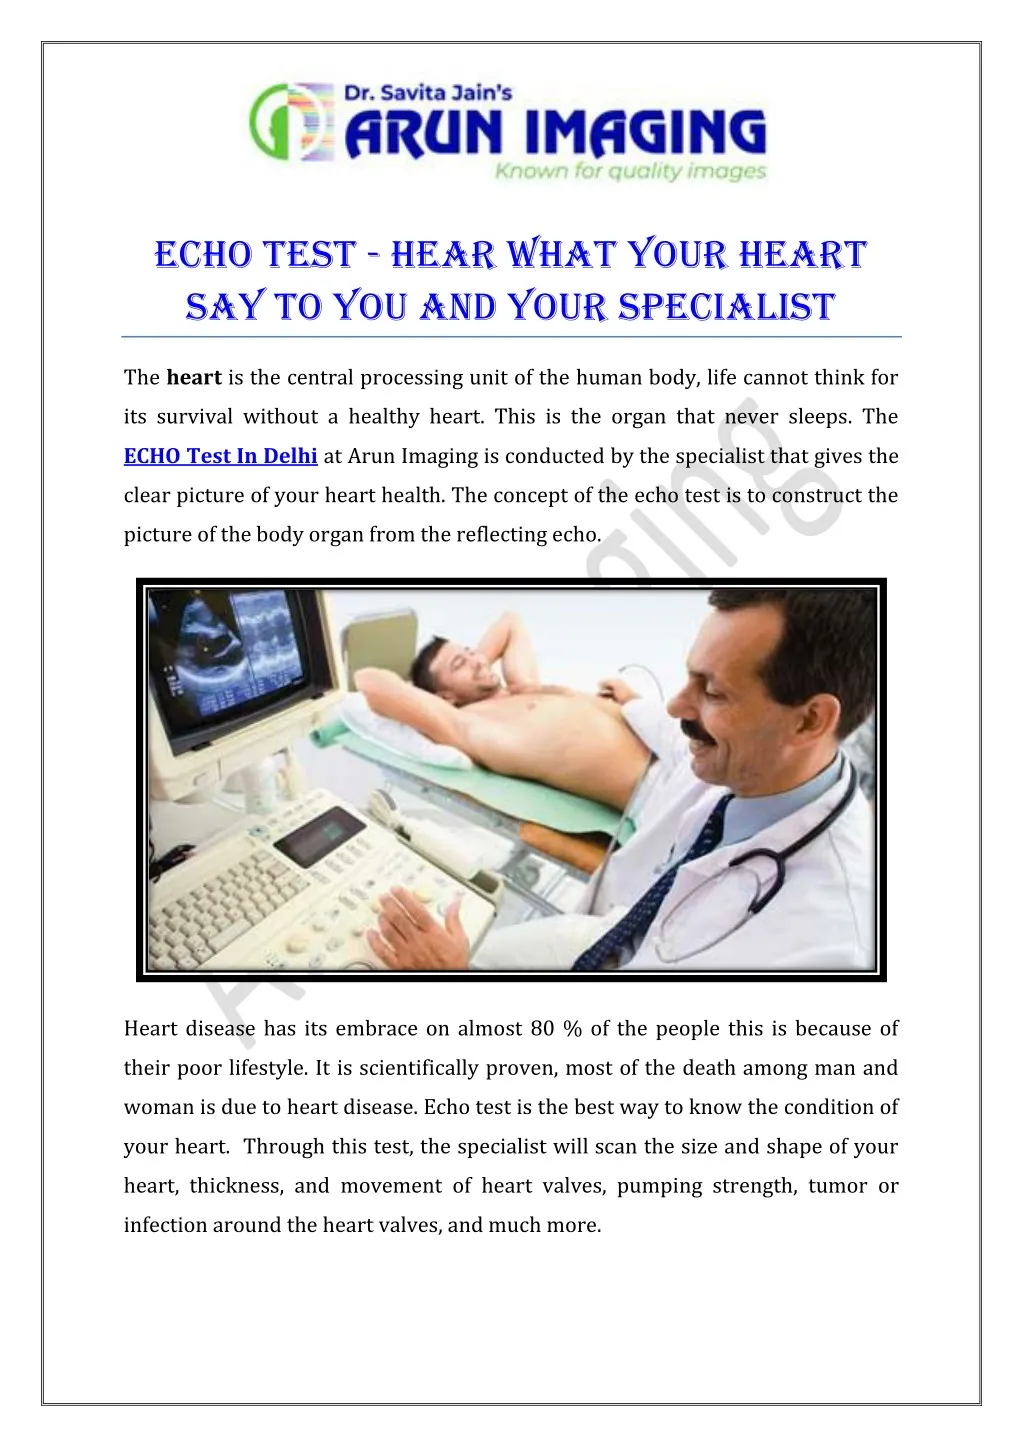 echo test hear what your heart